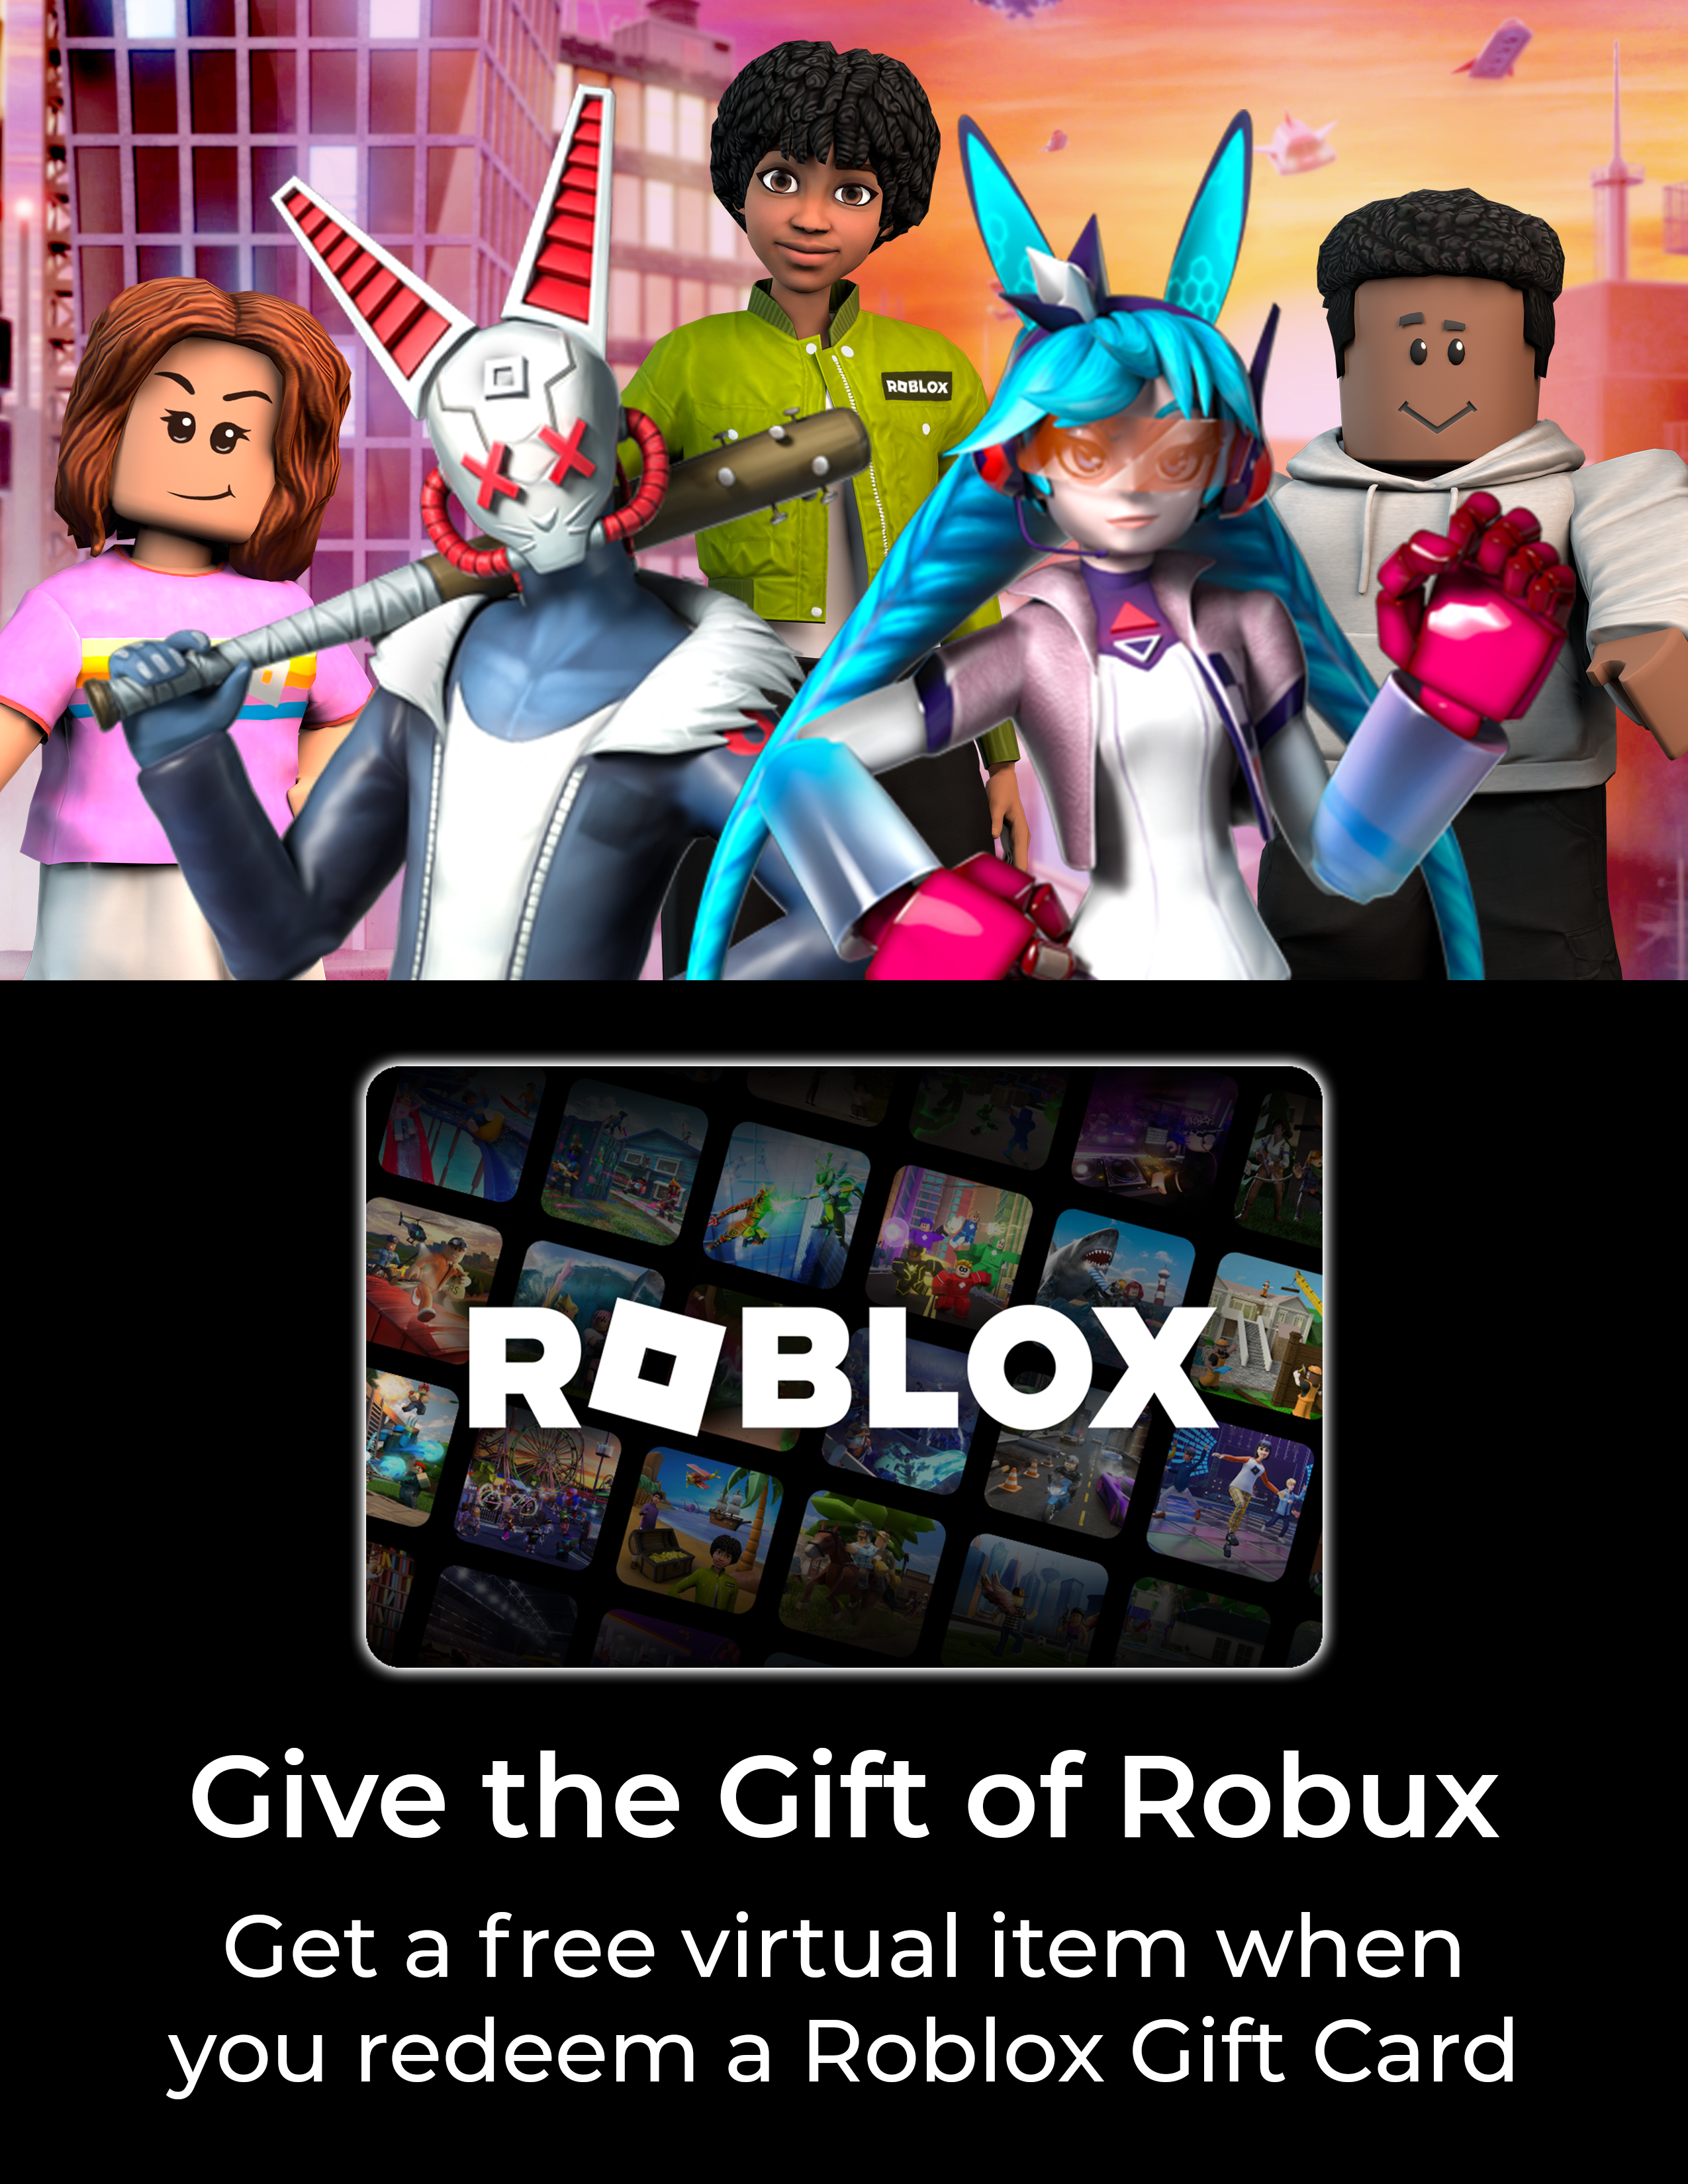 Give the gift of Robux with Roblox gift cards and level up your